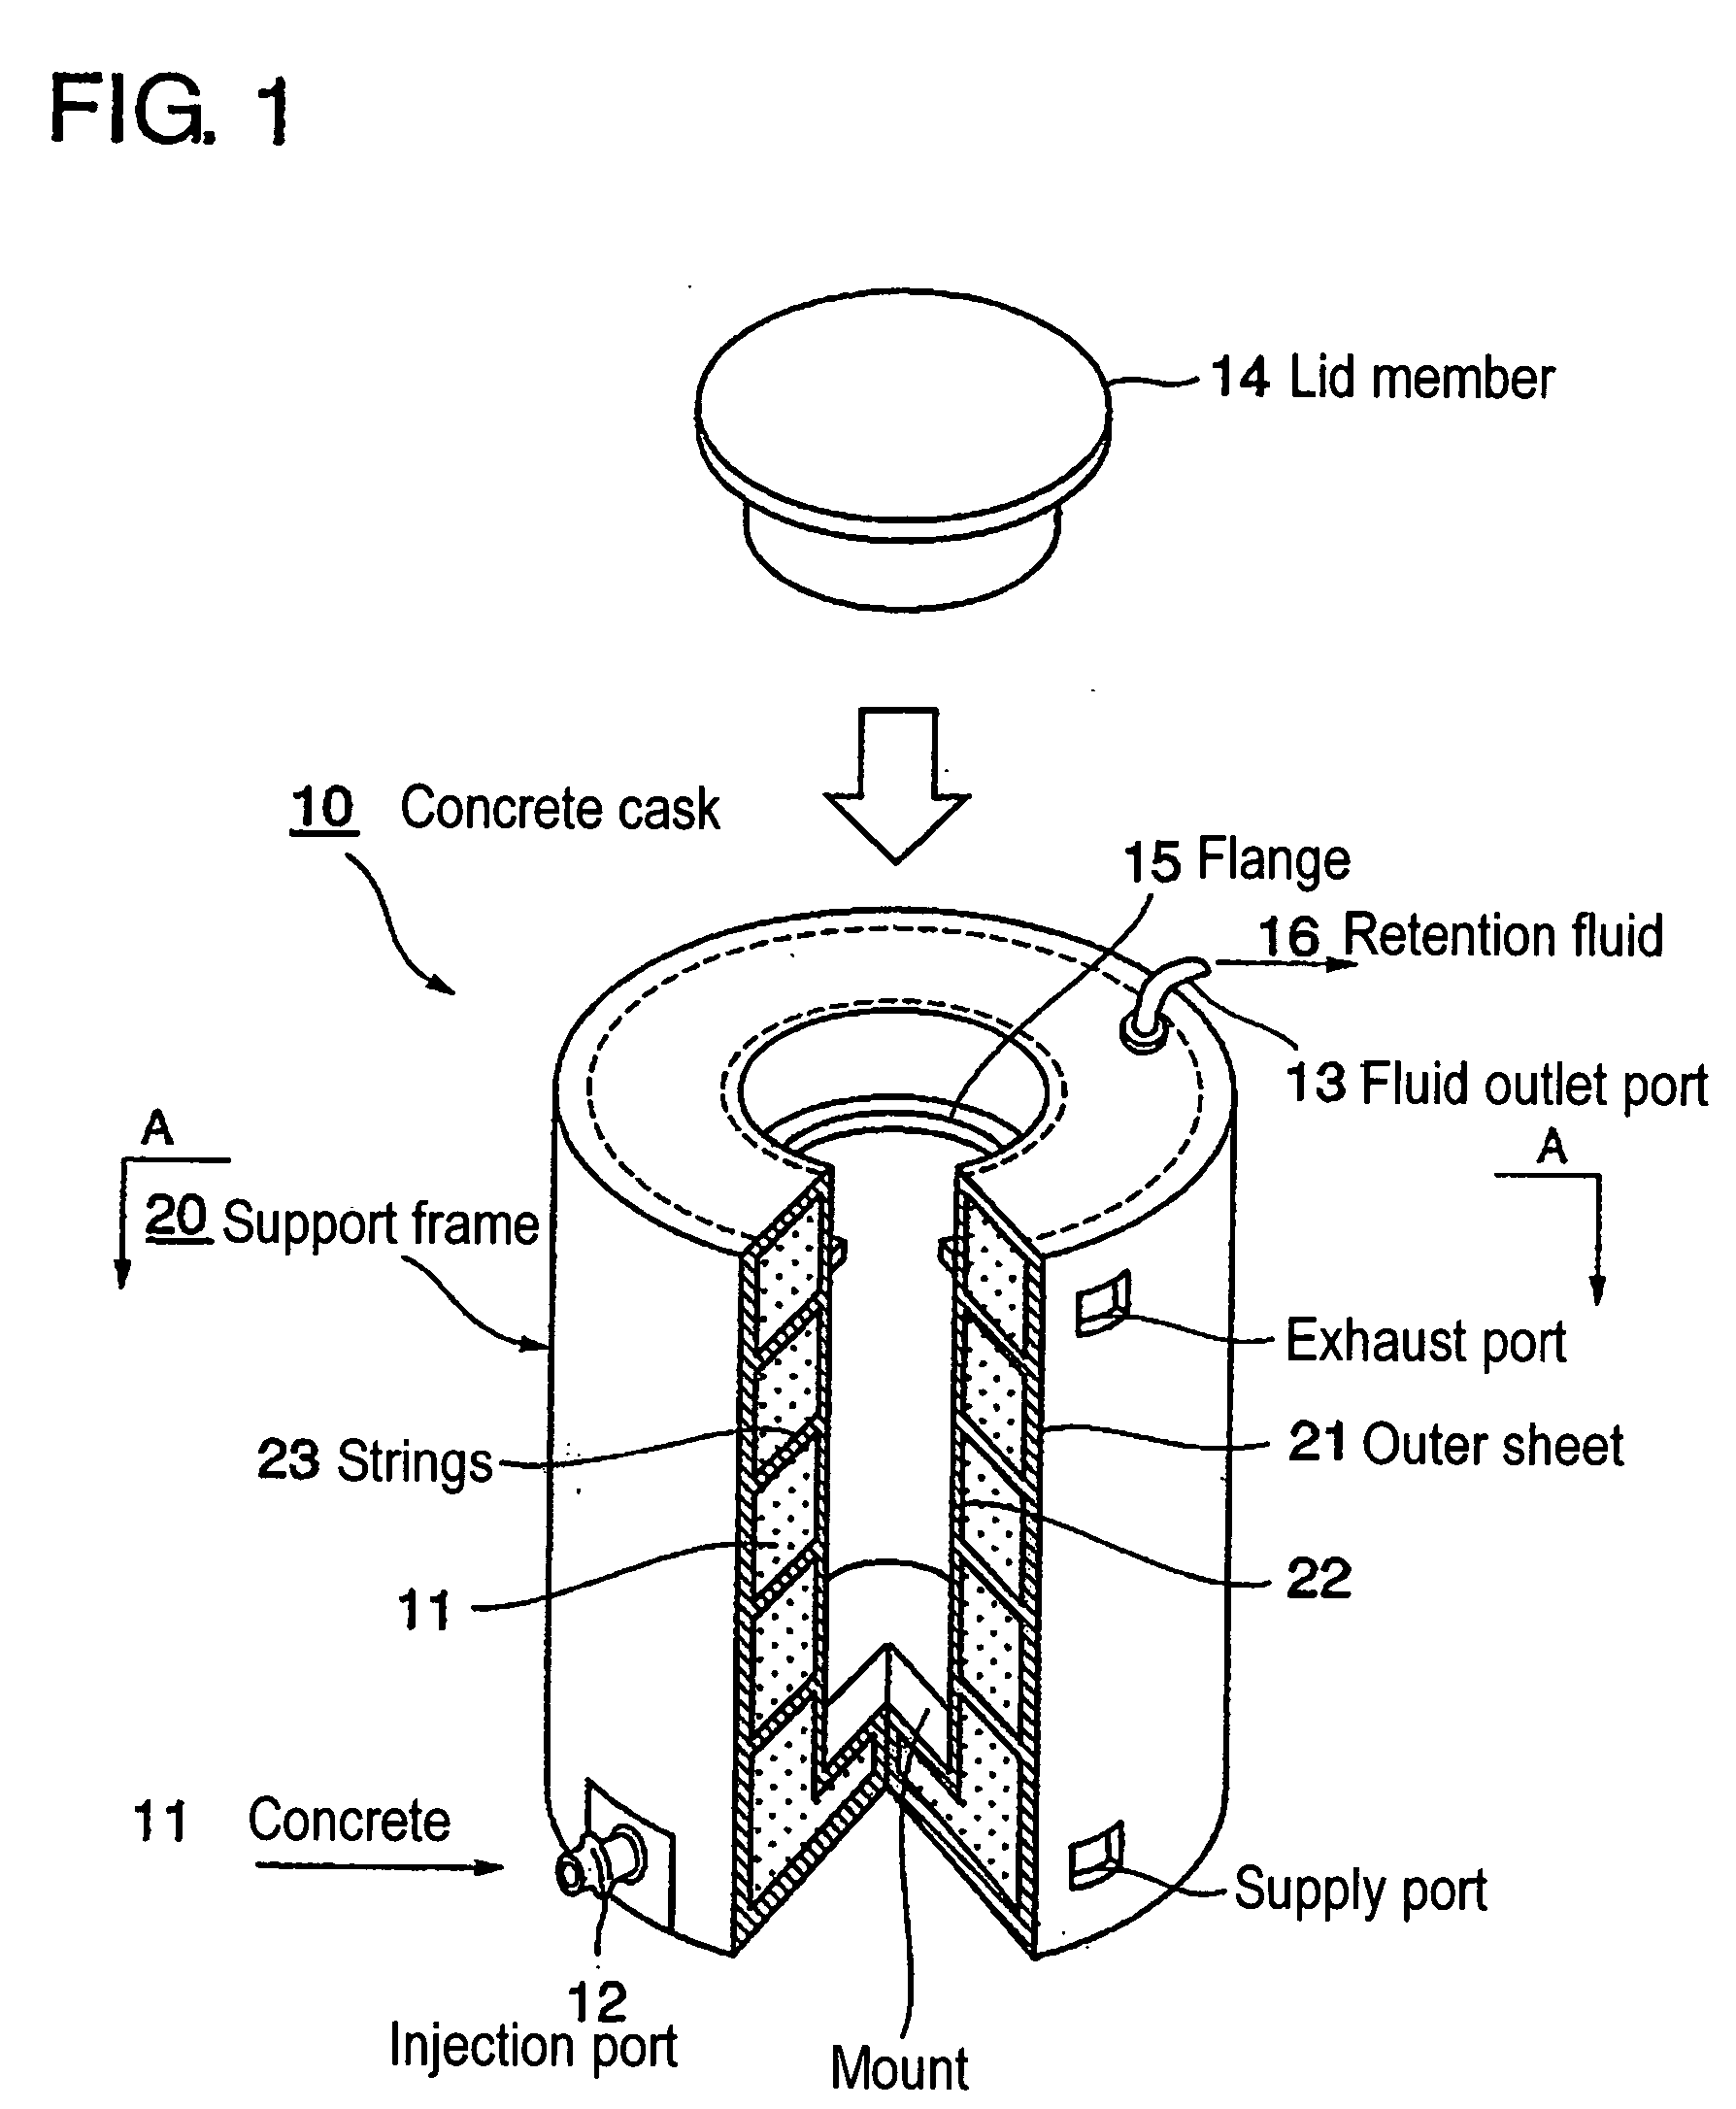 Fiber-reinforced concrete cask, supporting frame for molding thereof and process for produicng the concrete cask